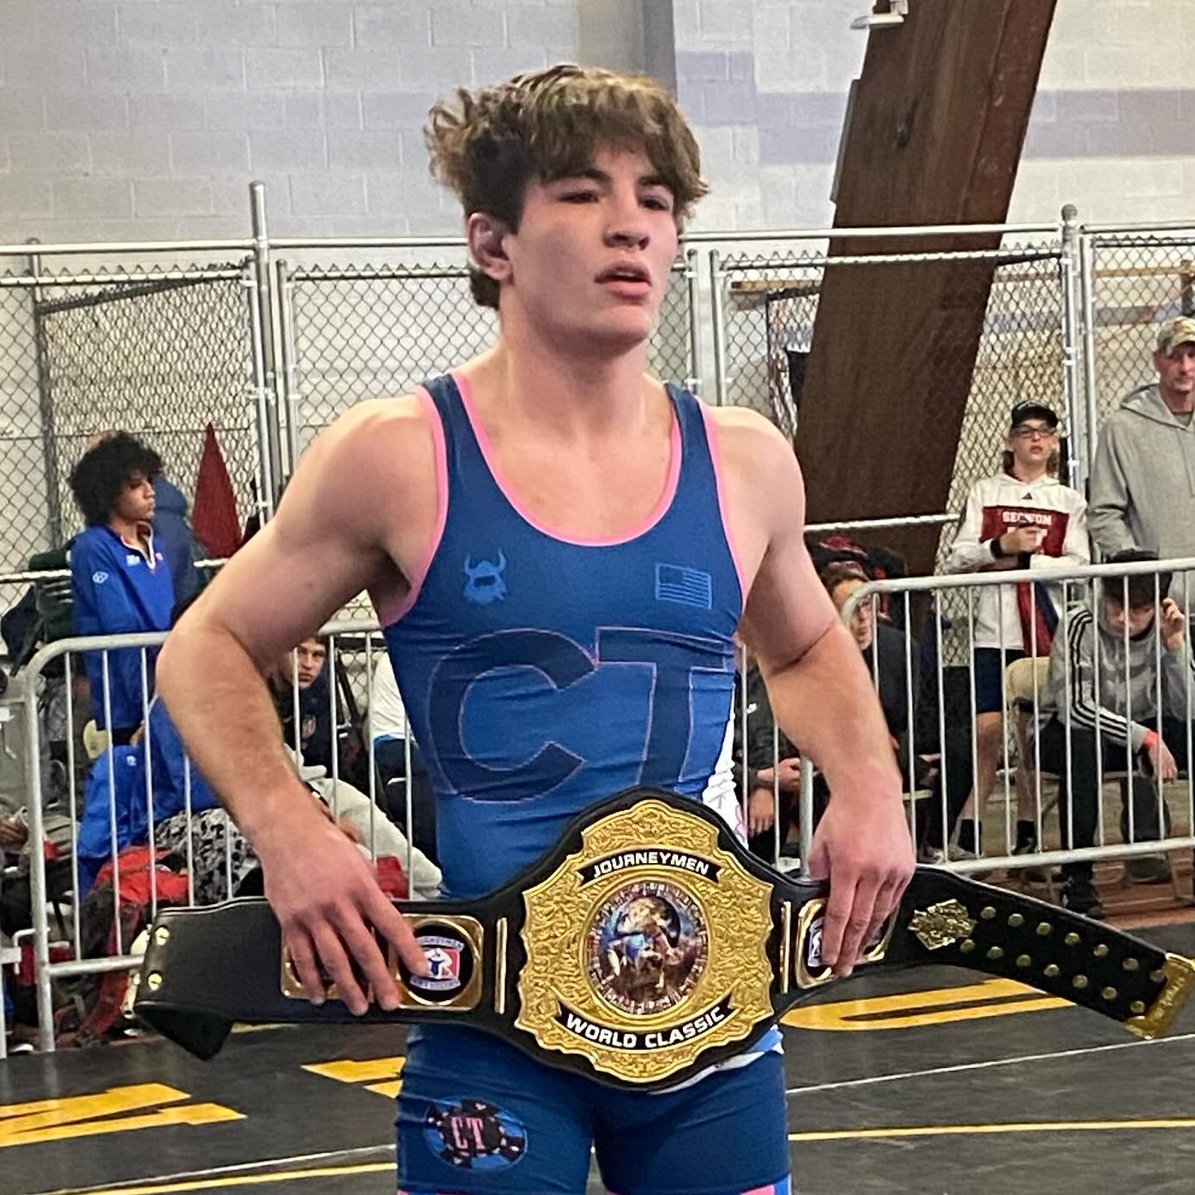 William Henckel, Penn State Commit - 170 Champion Journeymen World Classic FS Tournament, 3/30 5-0 with 2 Tech Falls in the Classic Junior from Blair Academy, NJ William be at the Last Chance, Olympic Team Trials Qualifier 4/7